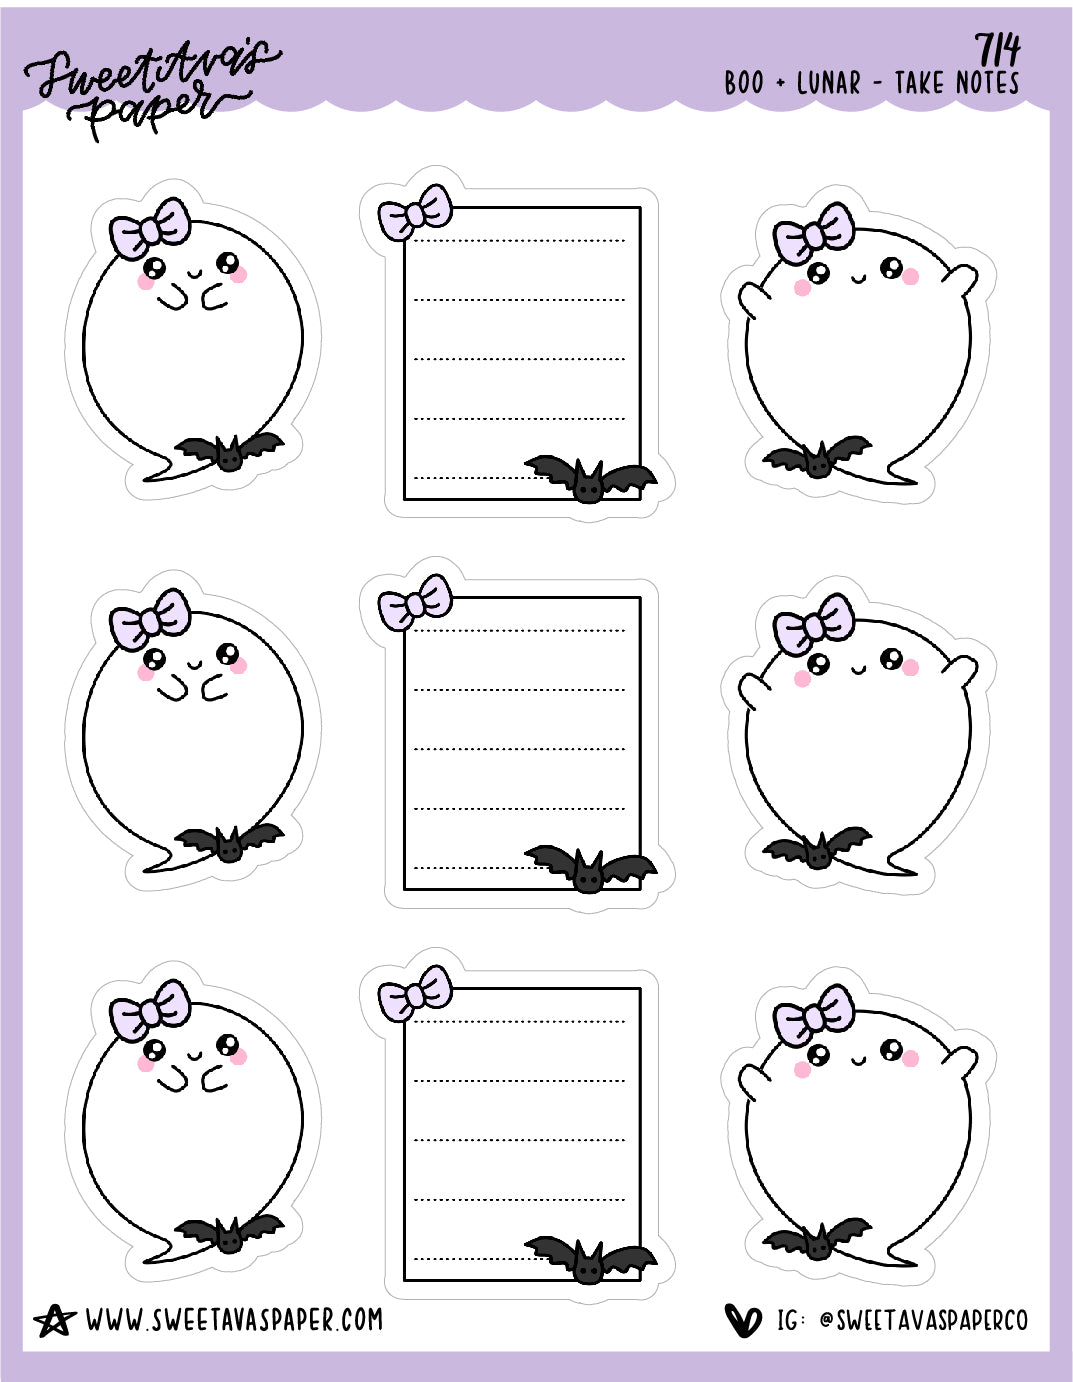 Spooky Notes Planner Stickers - Boo and Lunar [714]